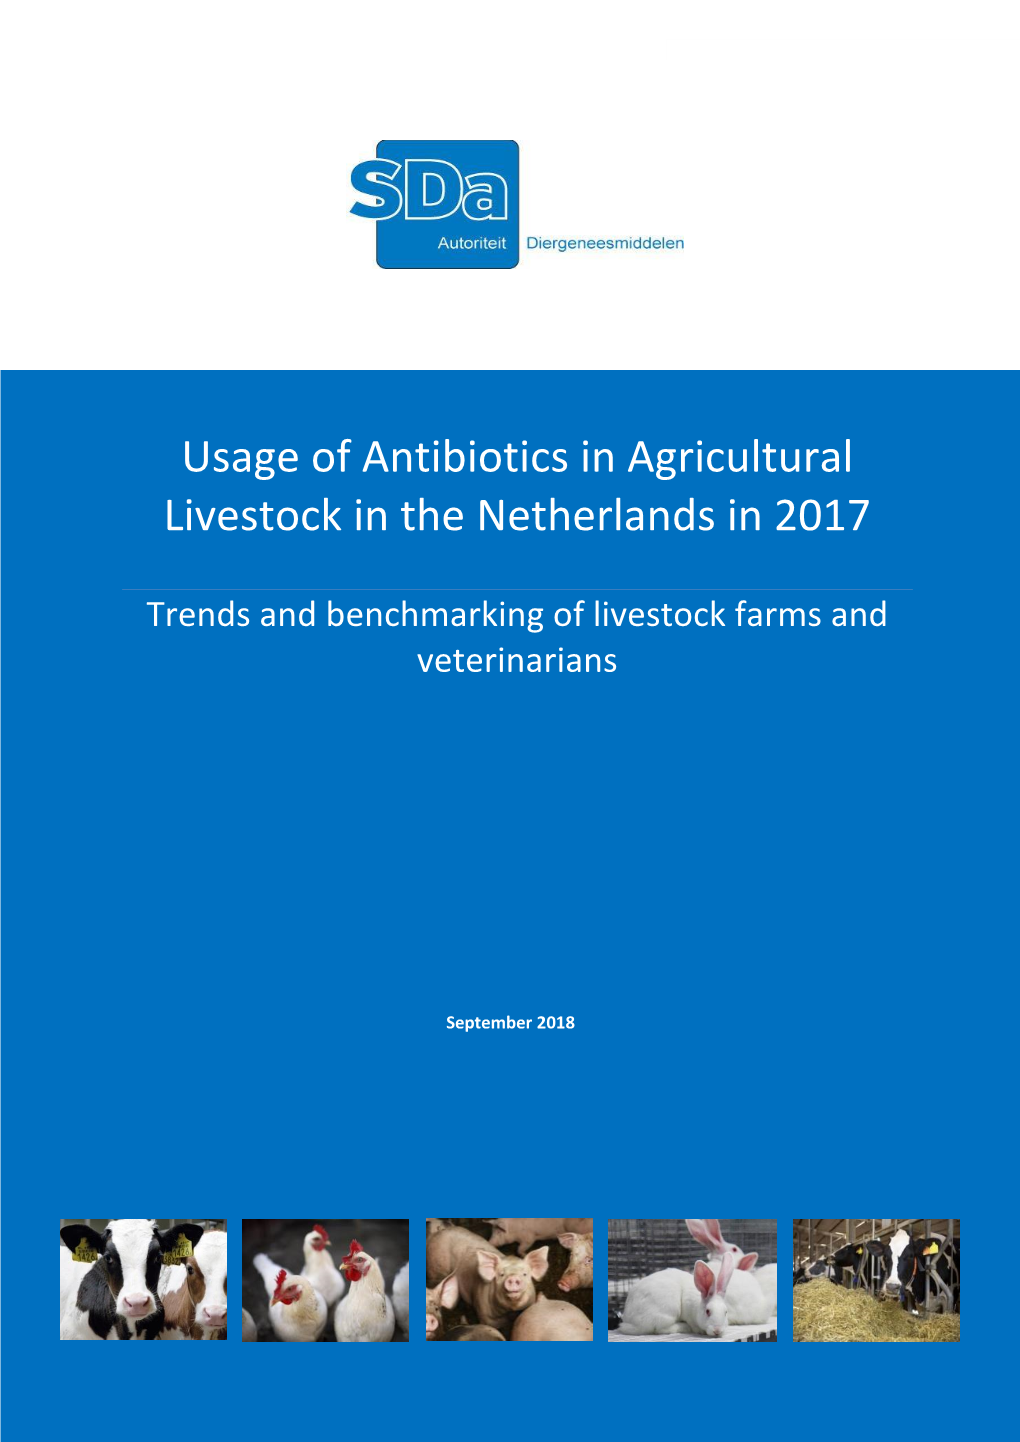 Usage of Antibiotics in Agricultural Livestock in the Netherlands in 2017